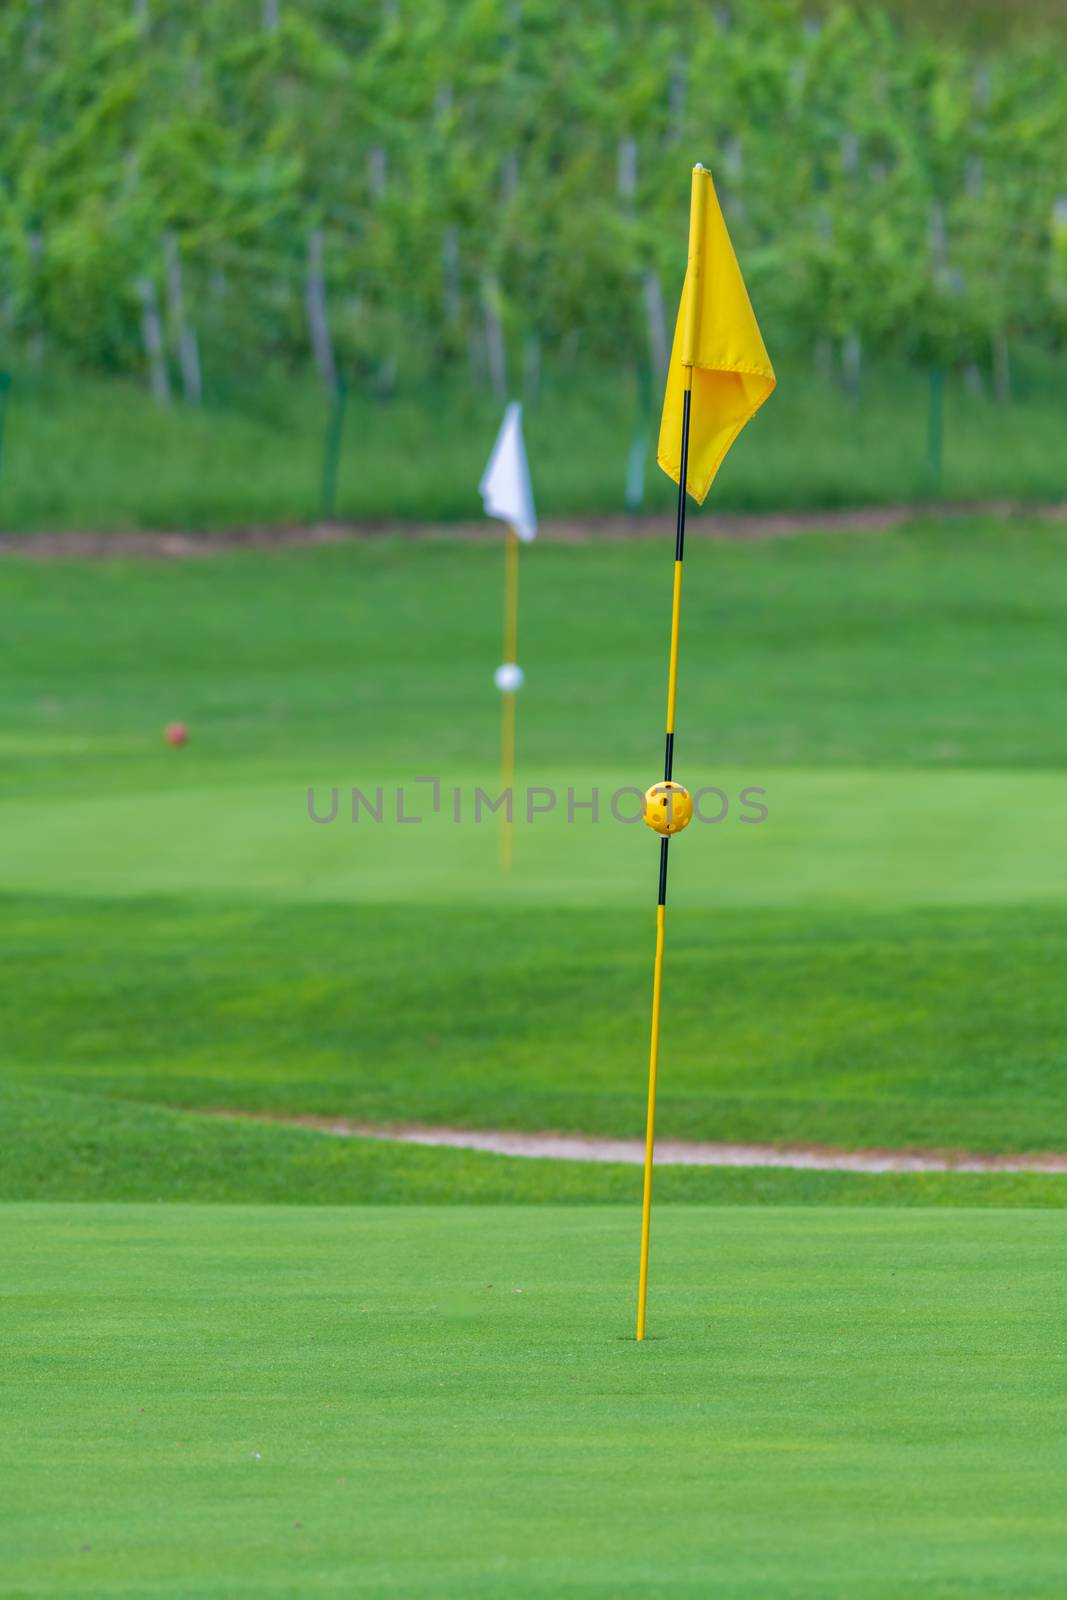 Golf Course, golf green with flag in the hole by asafaric